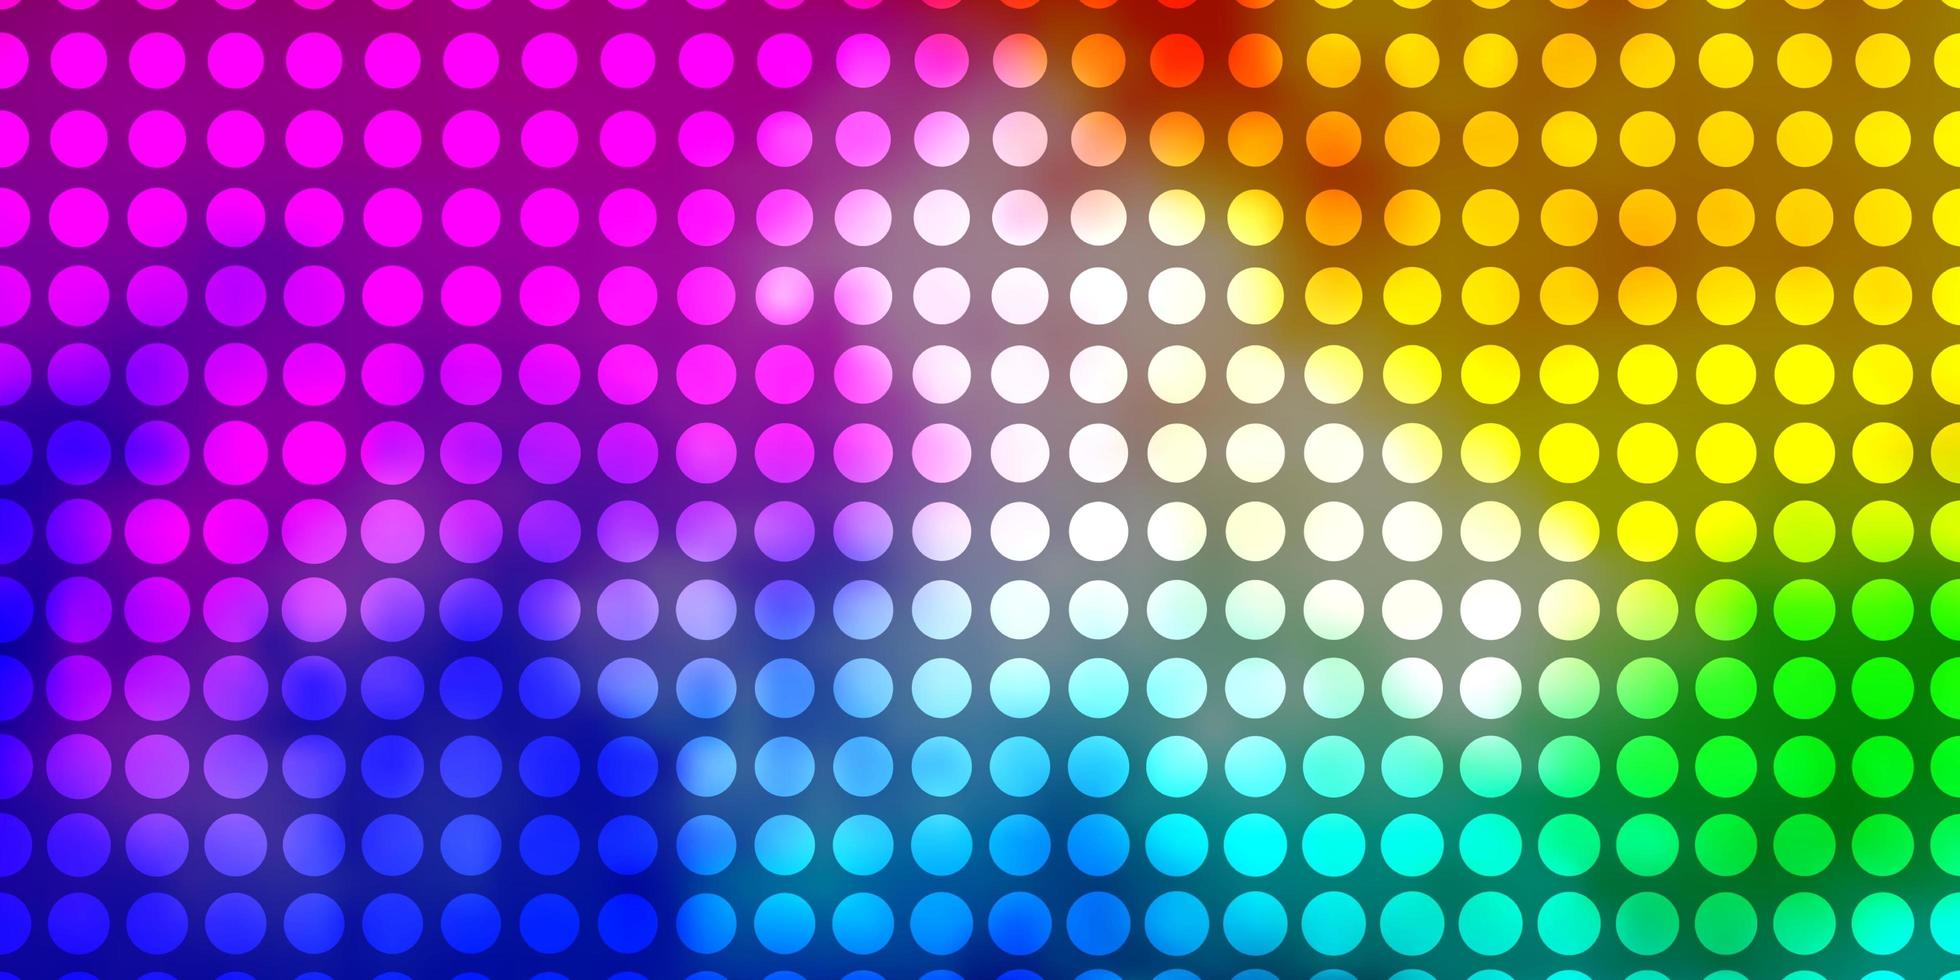 Light Multicolor vector layout with circles Abstract colorful disks on simple gradient background Pattern for websites landing pages